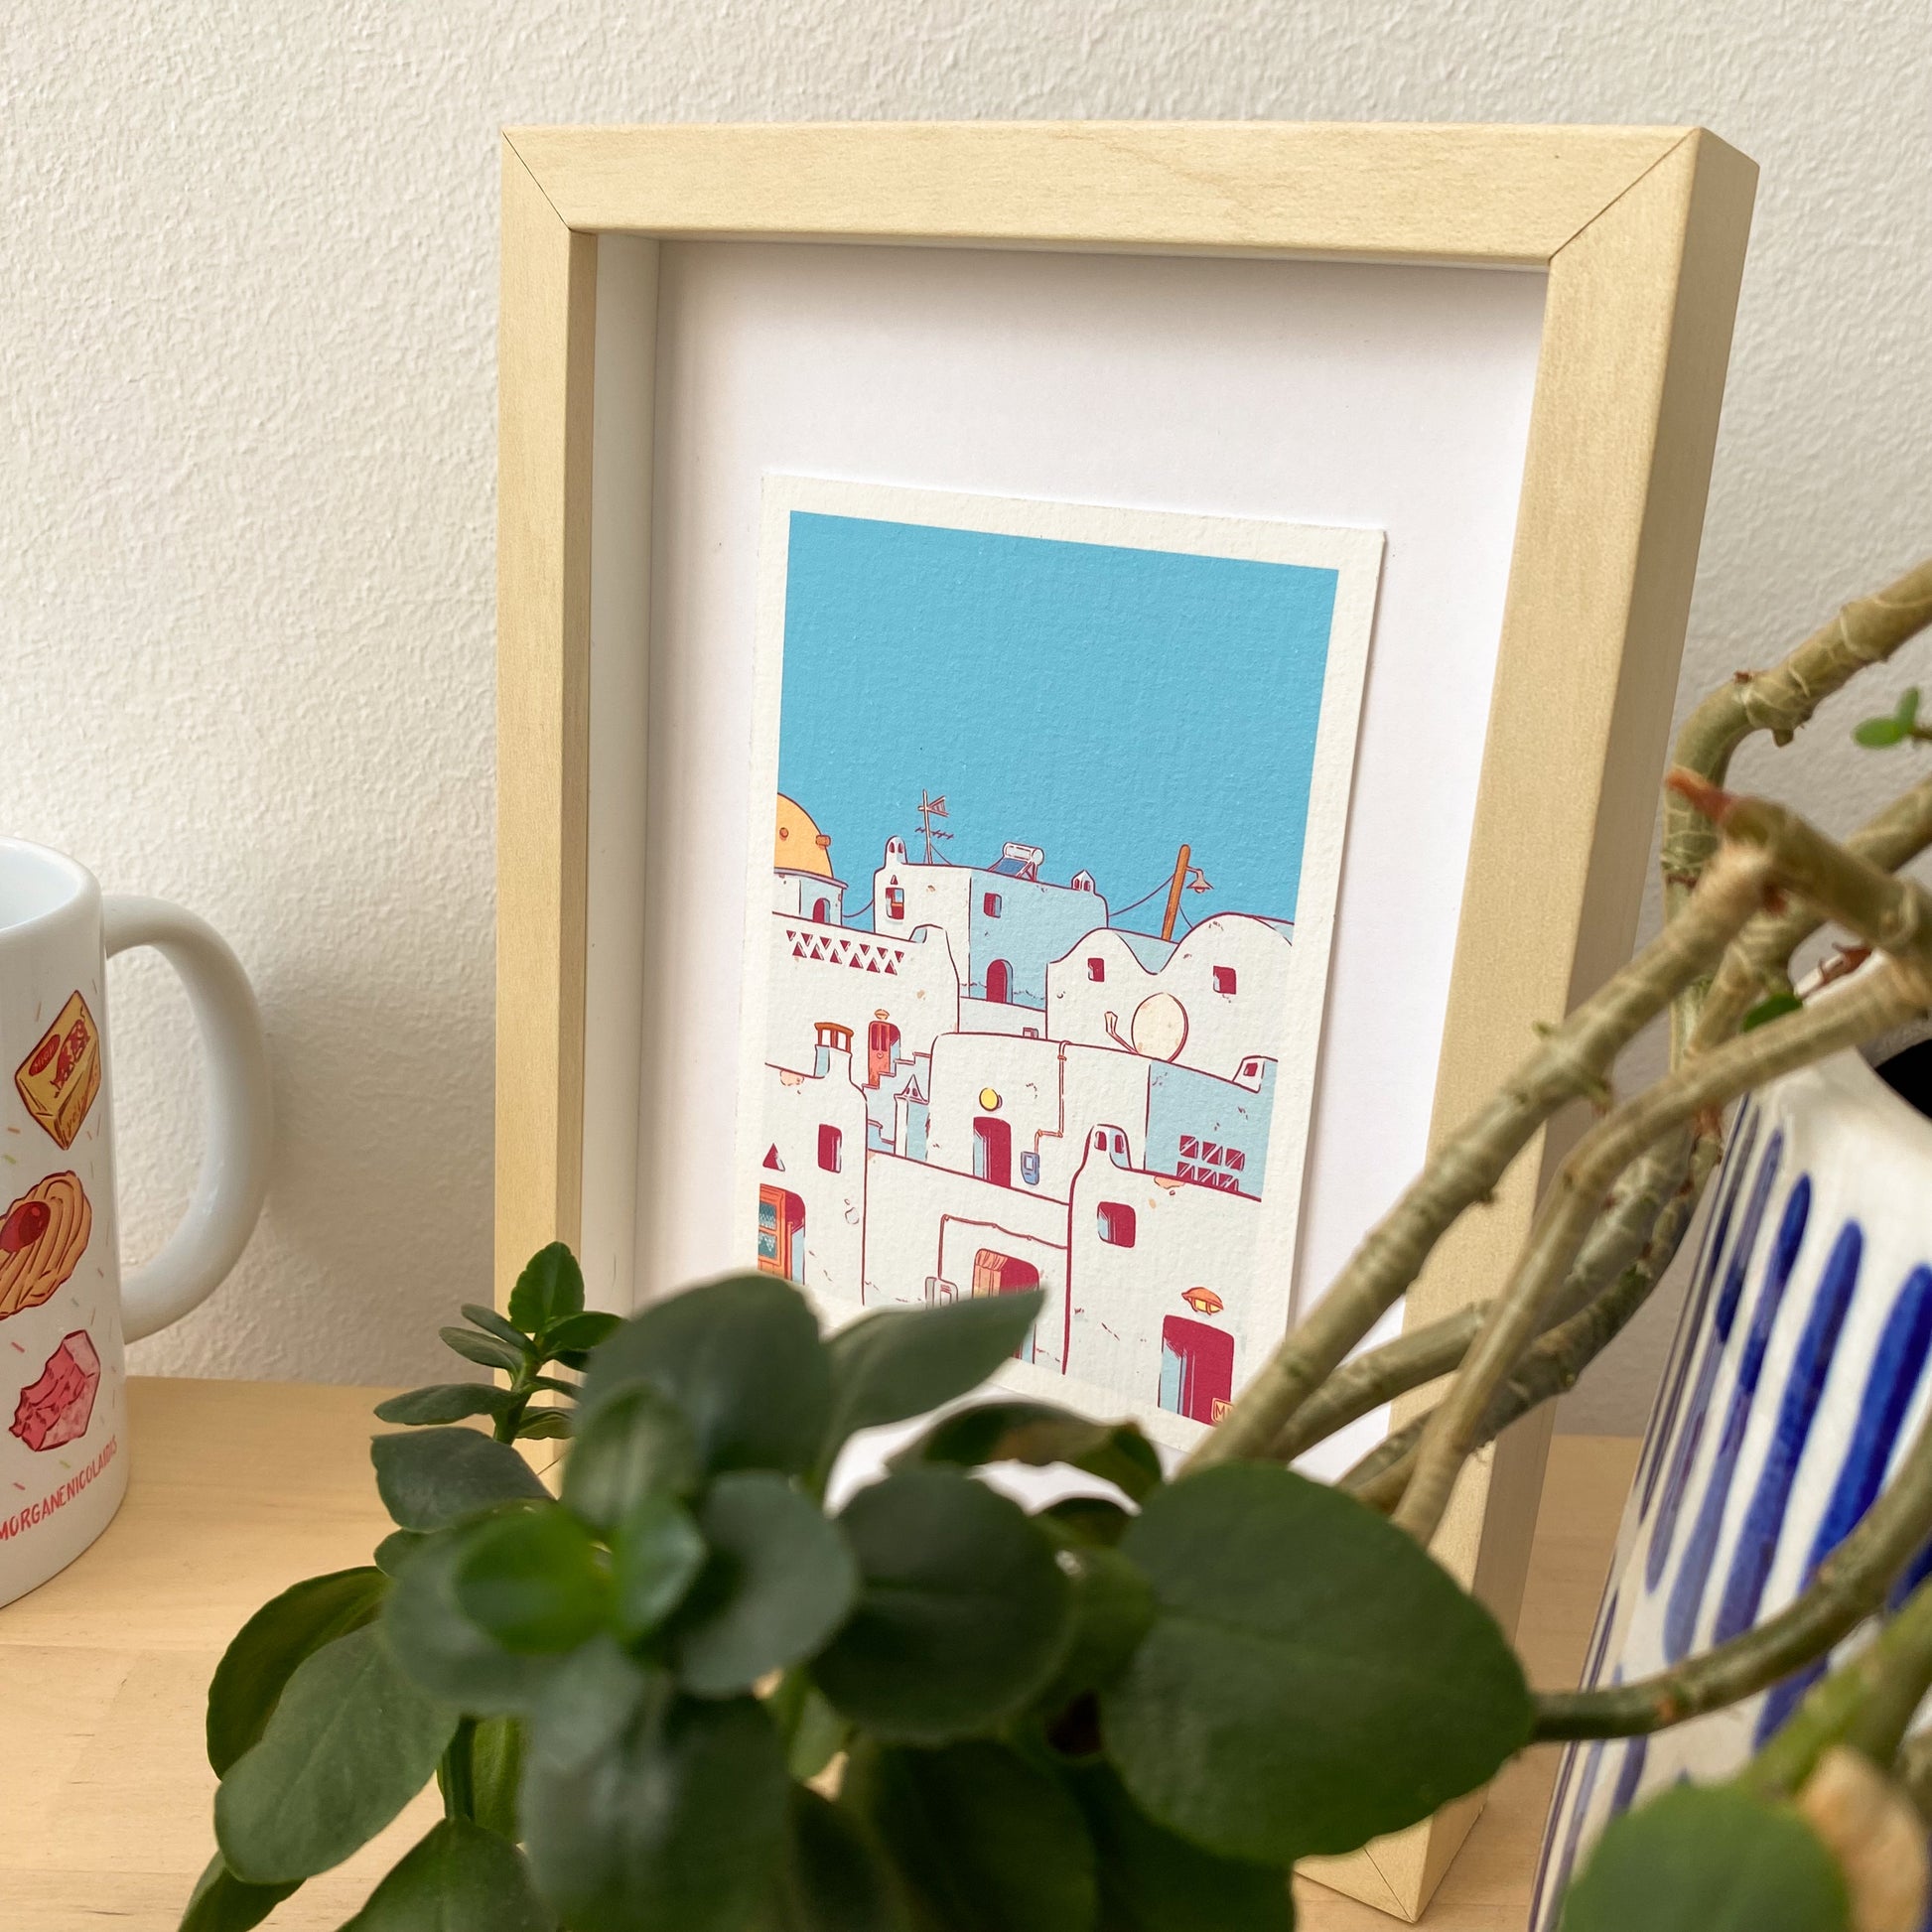 the print is placed on a small frame, on a wooden bench. On the first plan we have some plant on a decorative vase, at the left of the photography we can also see one of my mug.